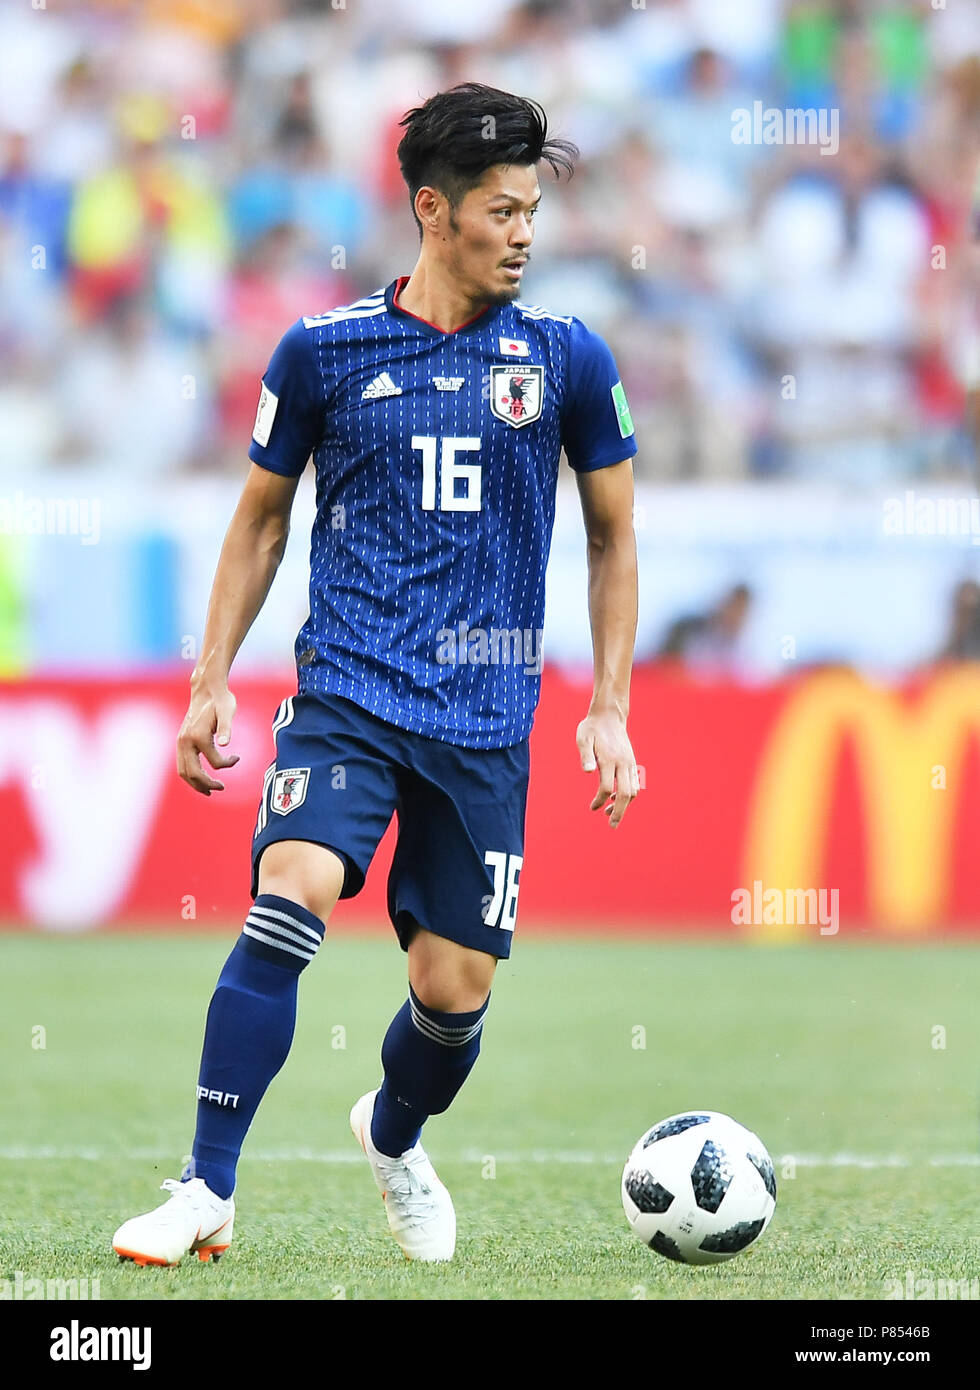 VOLGOGRAD, RUSSIA - JUNE 28: Hotaru Yamaguchi of Japan in action during the 2018 FIFA World Cup Russia group H match between Japan and Poland at Volgograd Arena on June 28, 2018 in Volgograd, Russia. (Photo by Lukasz Laskowski/PressFocus/MB Media/) Stock Photo